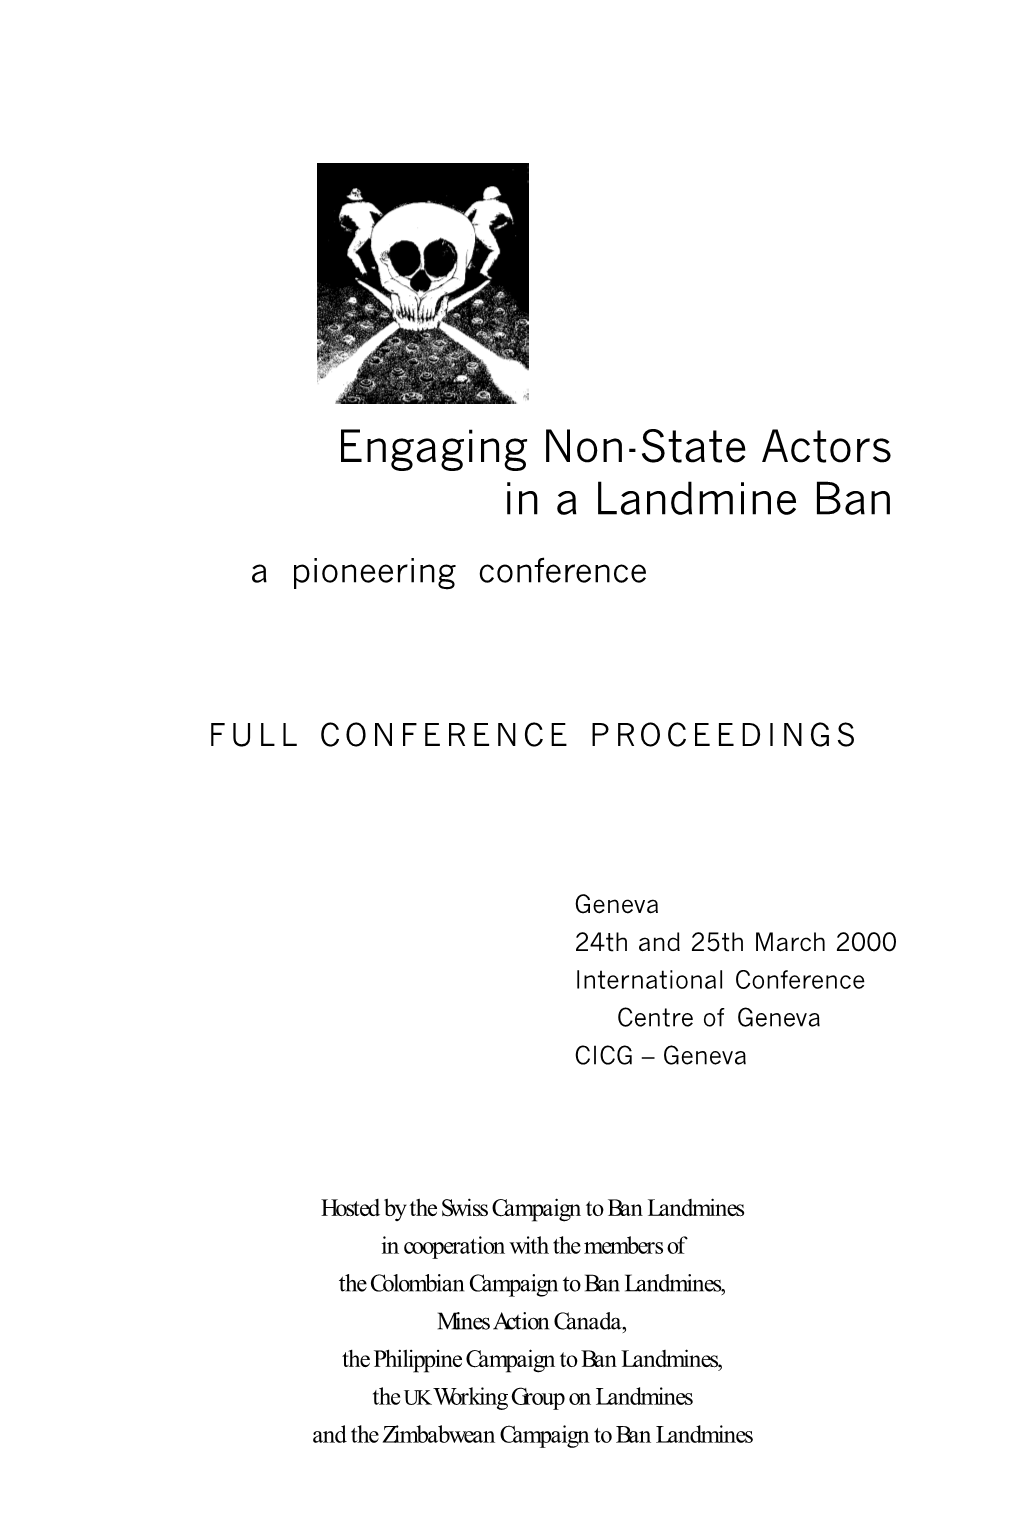 International Conference on Engaging Non-State Actors in a Landmine